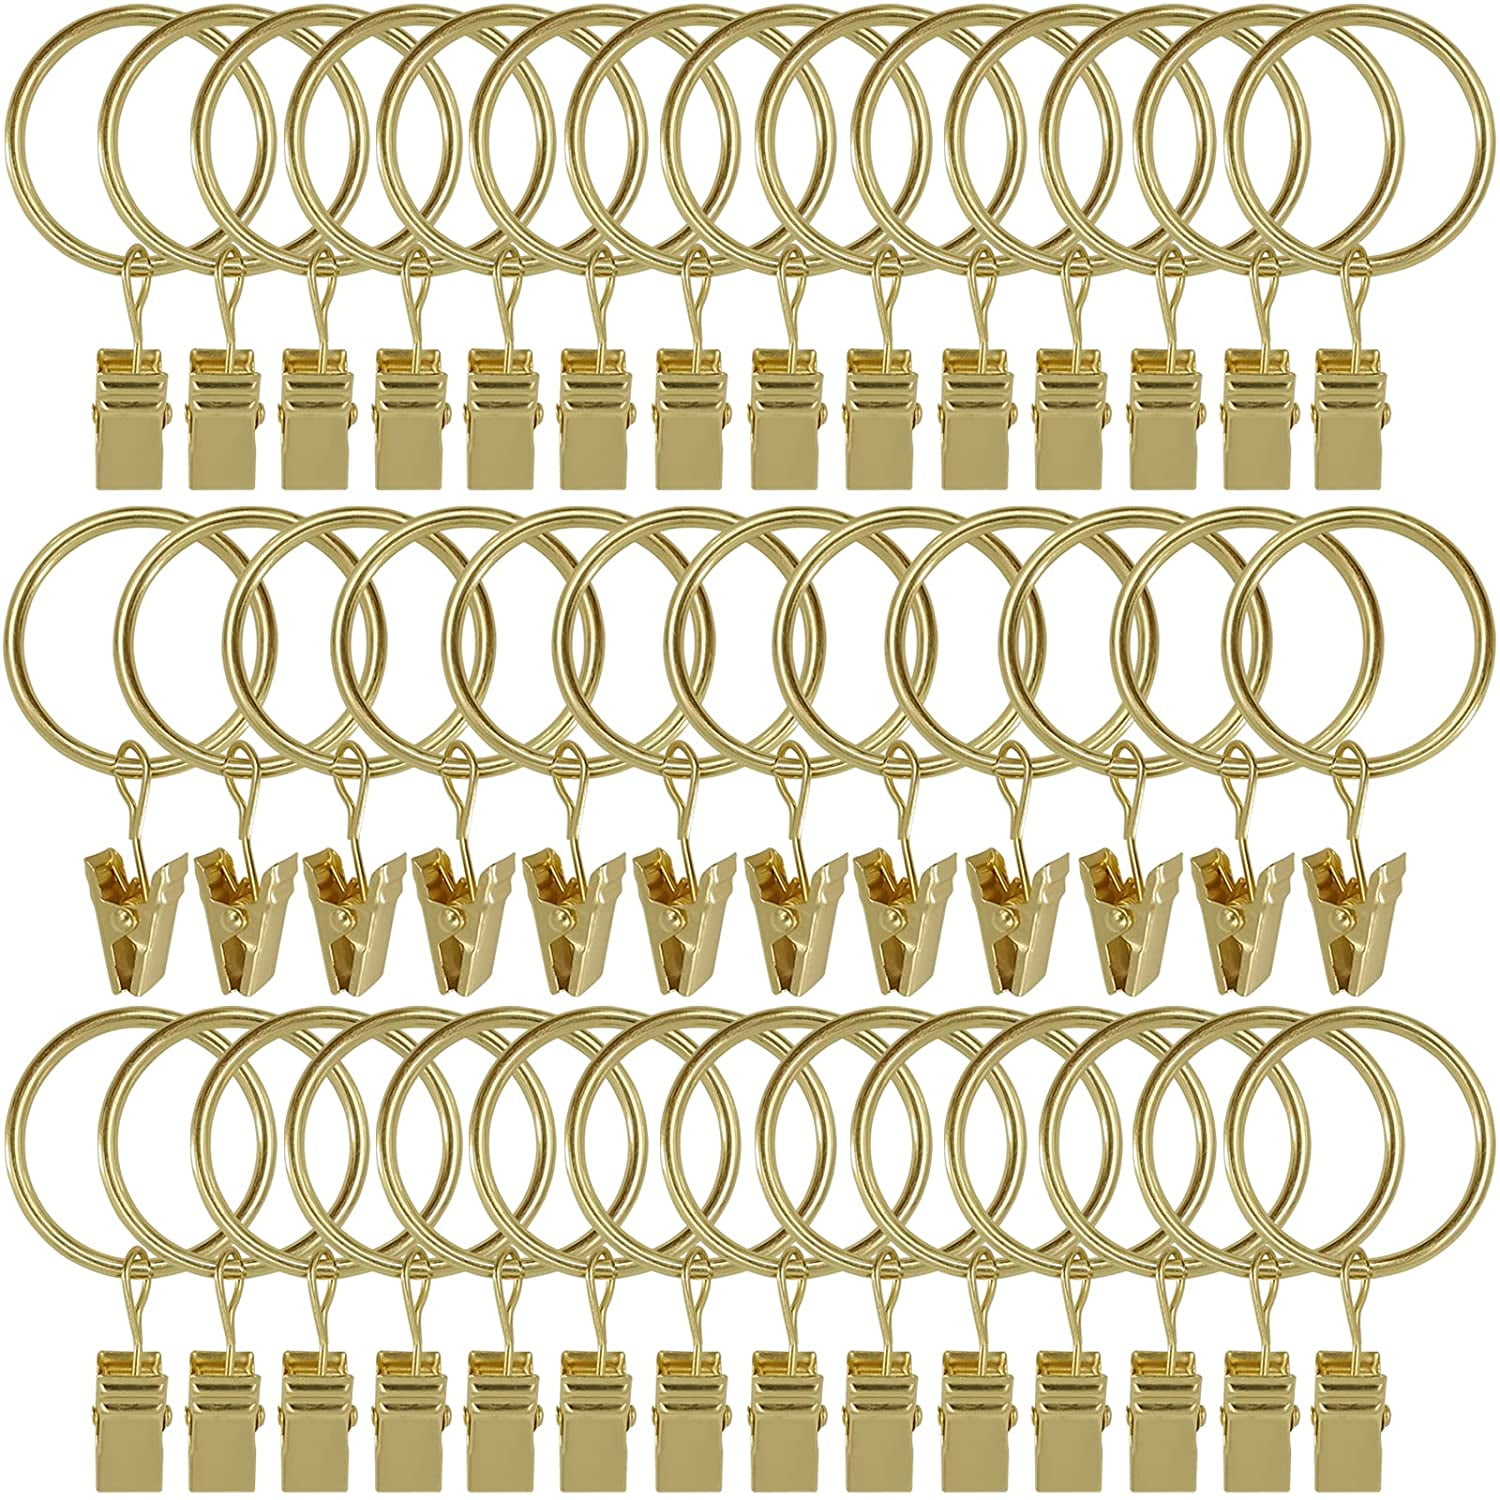 Drapes Rings 1 in Interior Diameter Vintage Bronze Drapery Clips with Rings Fits Diameter 5/8 in Curtain Rod AMZSEVEN 44 Pack Metal Curtain Rings with Clips Curtain Hangers Clips 